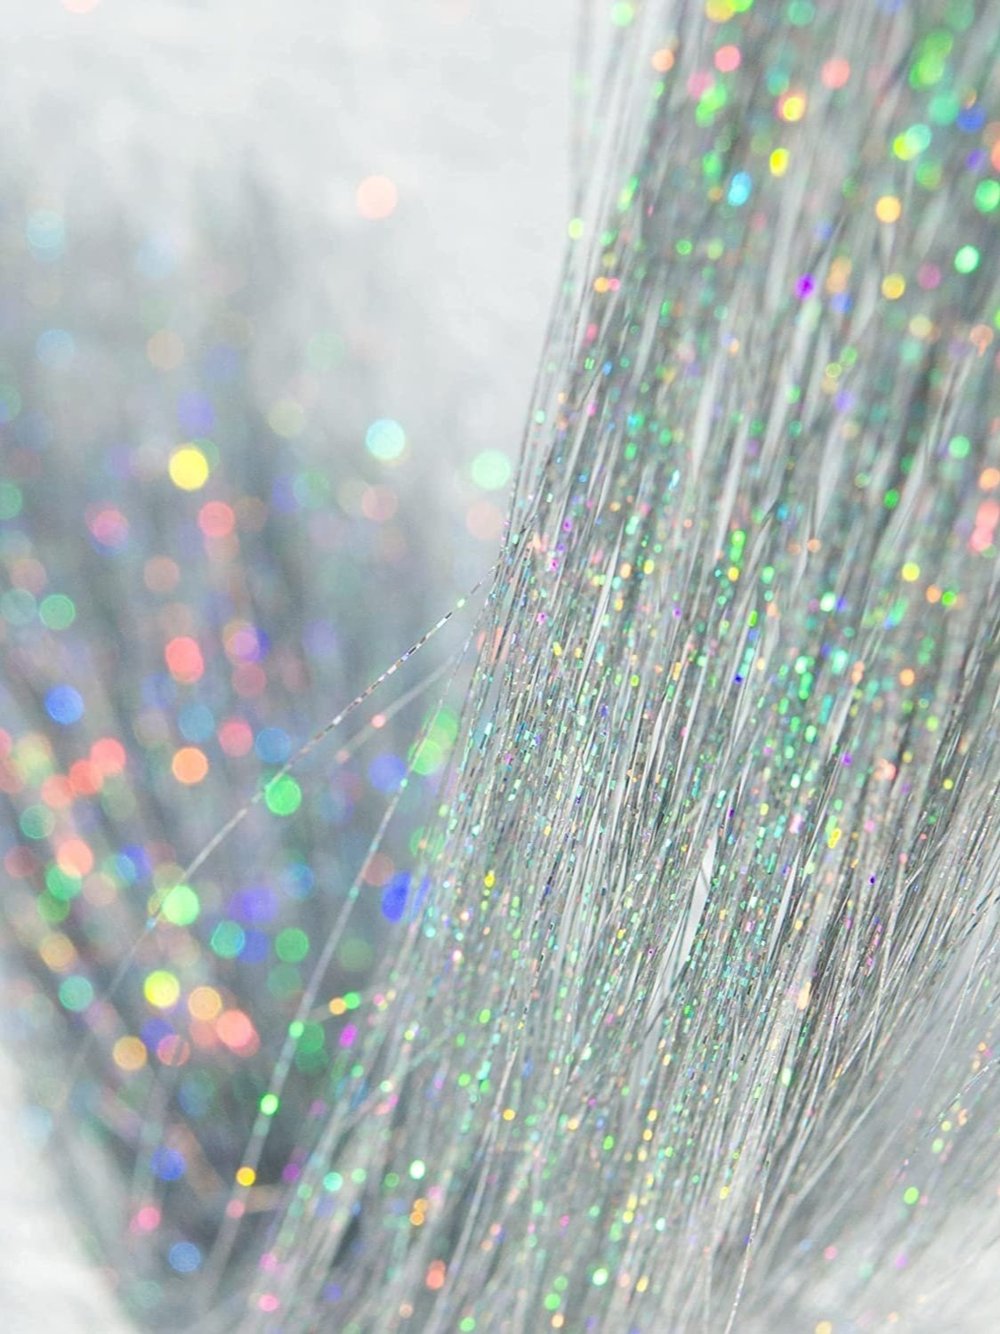 Silver Holographic Sparkle Tinsel (200 Strands) From Amazon, £3.49